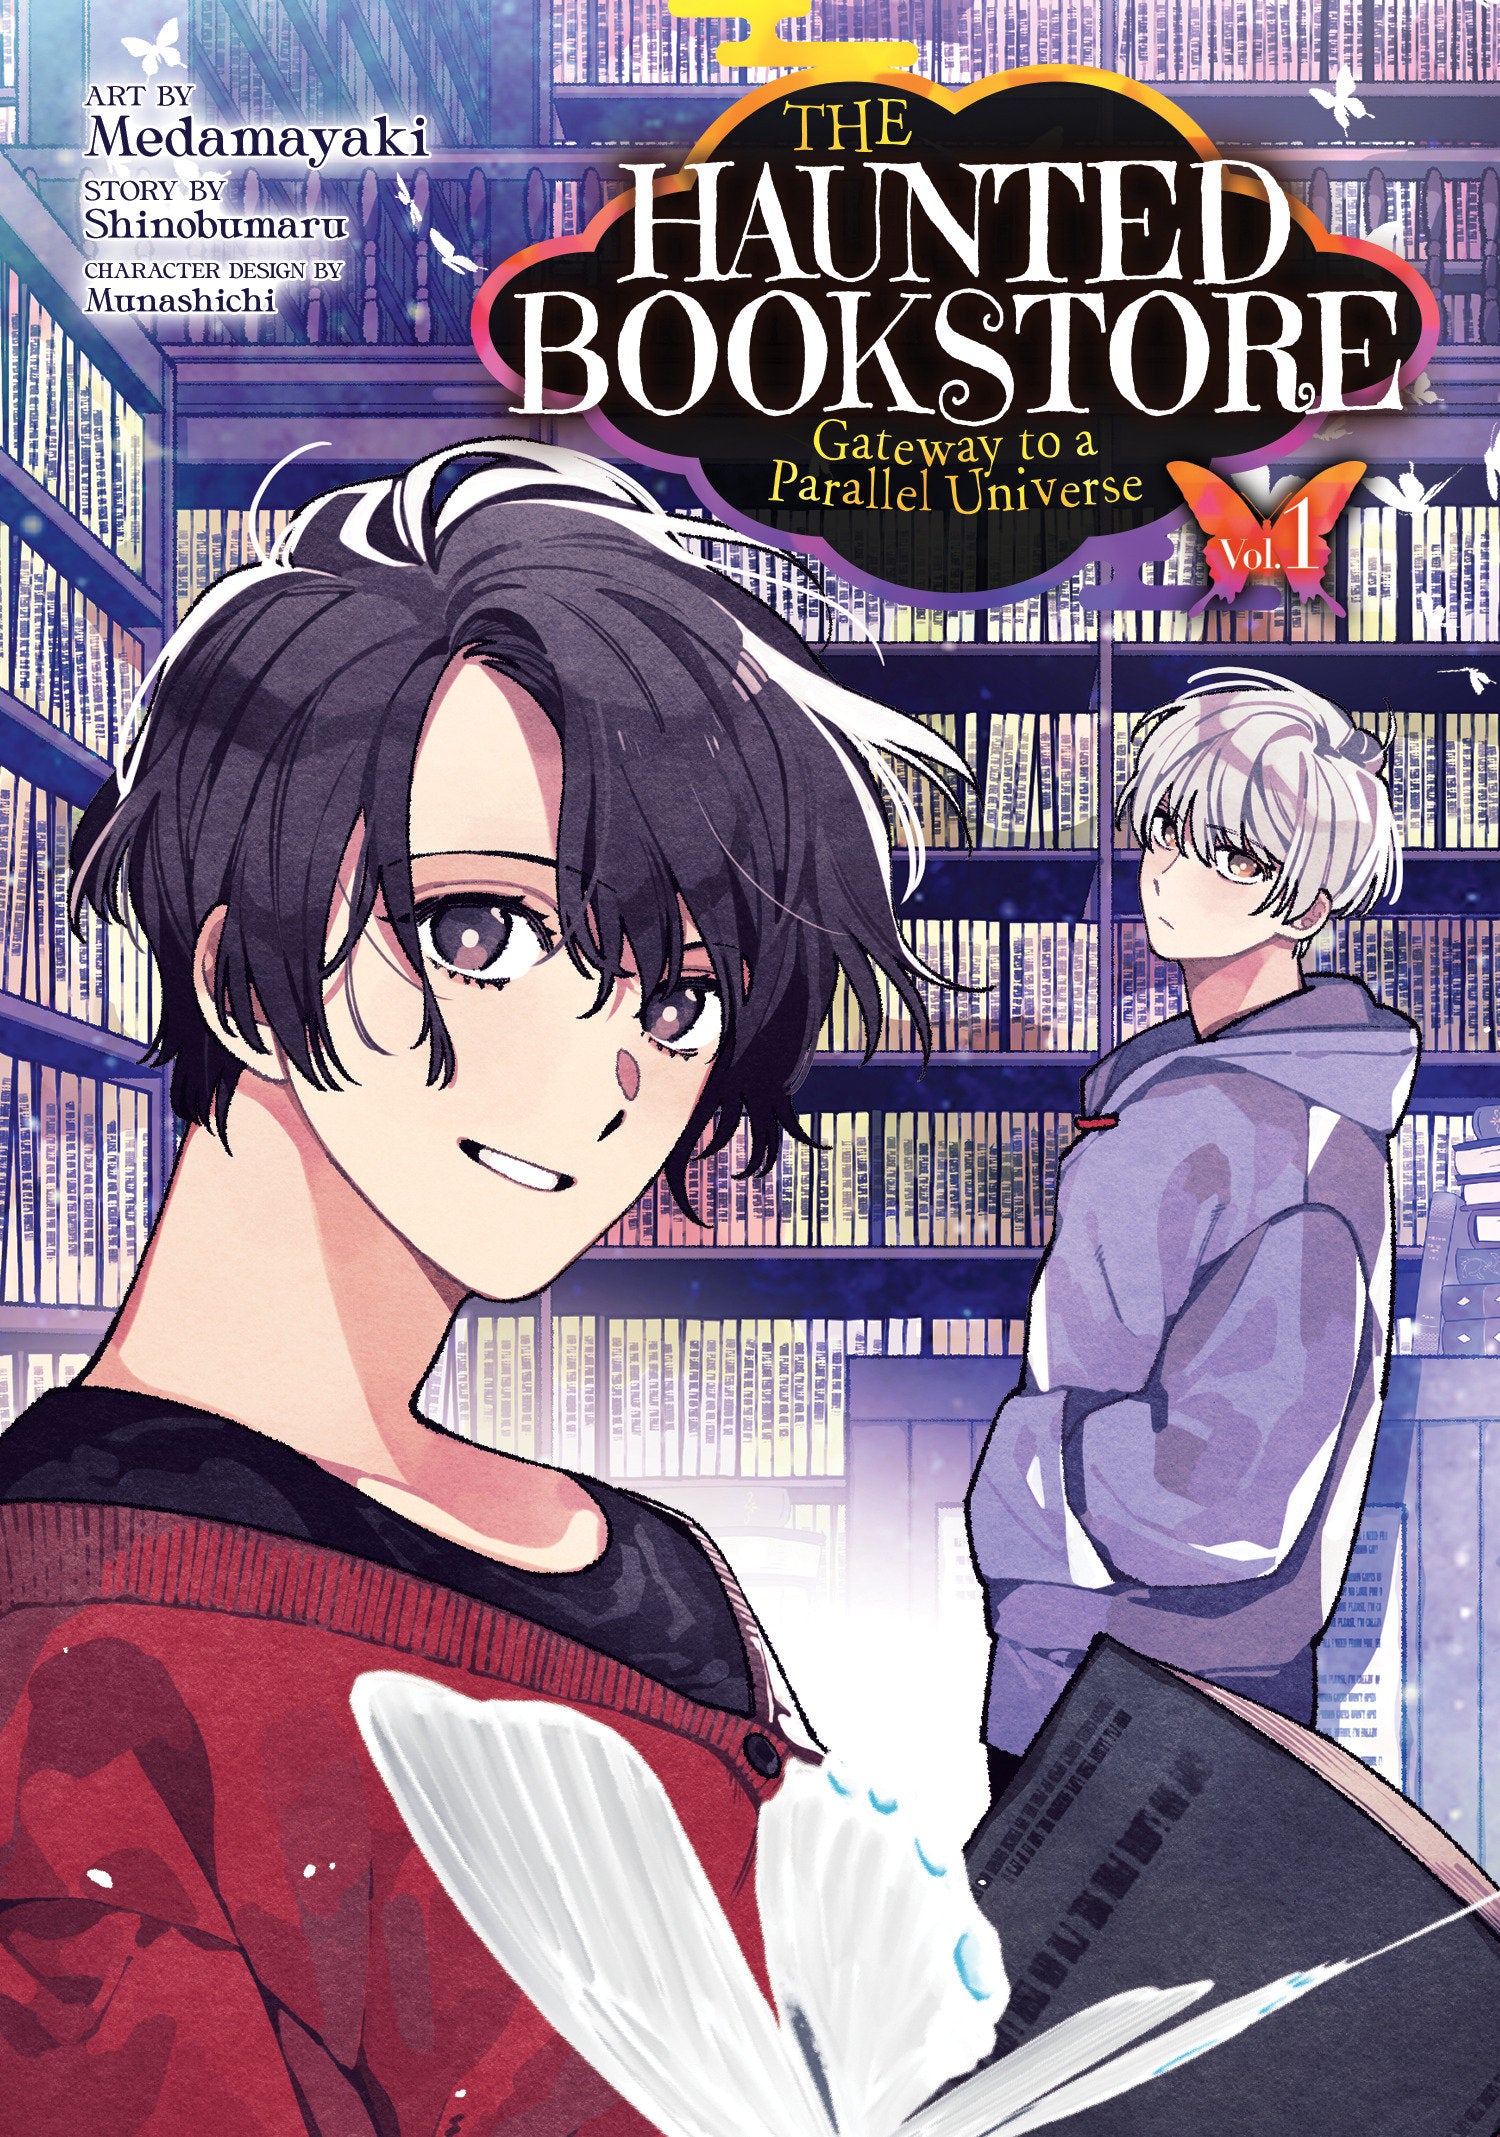 The Haunted Bookstore - Gateway to a Parallel Universe (Manga) Vol. 01